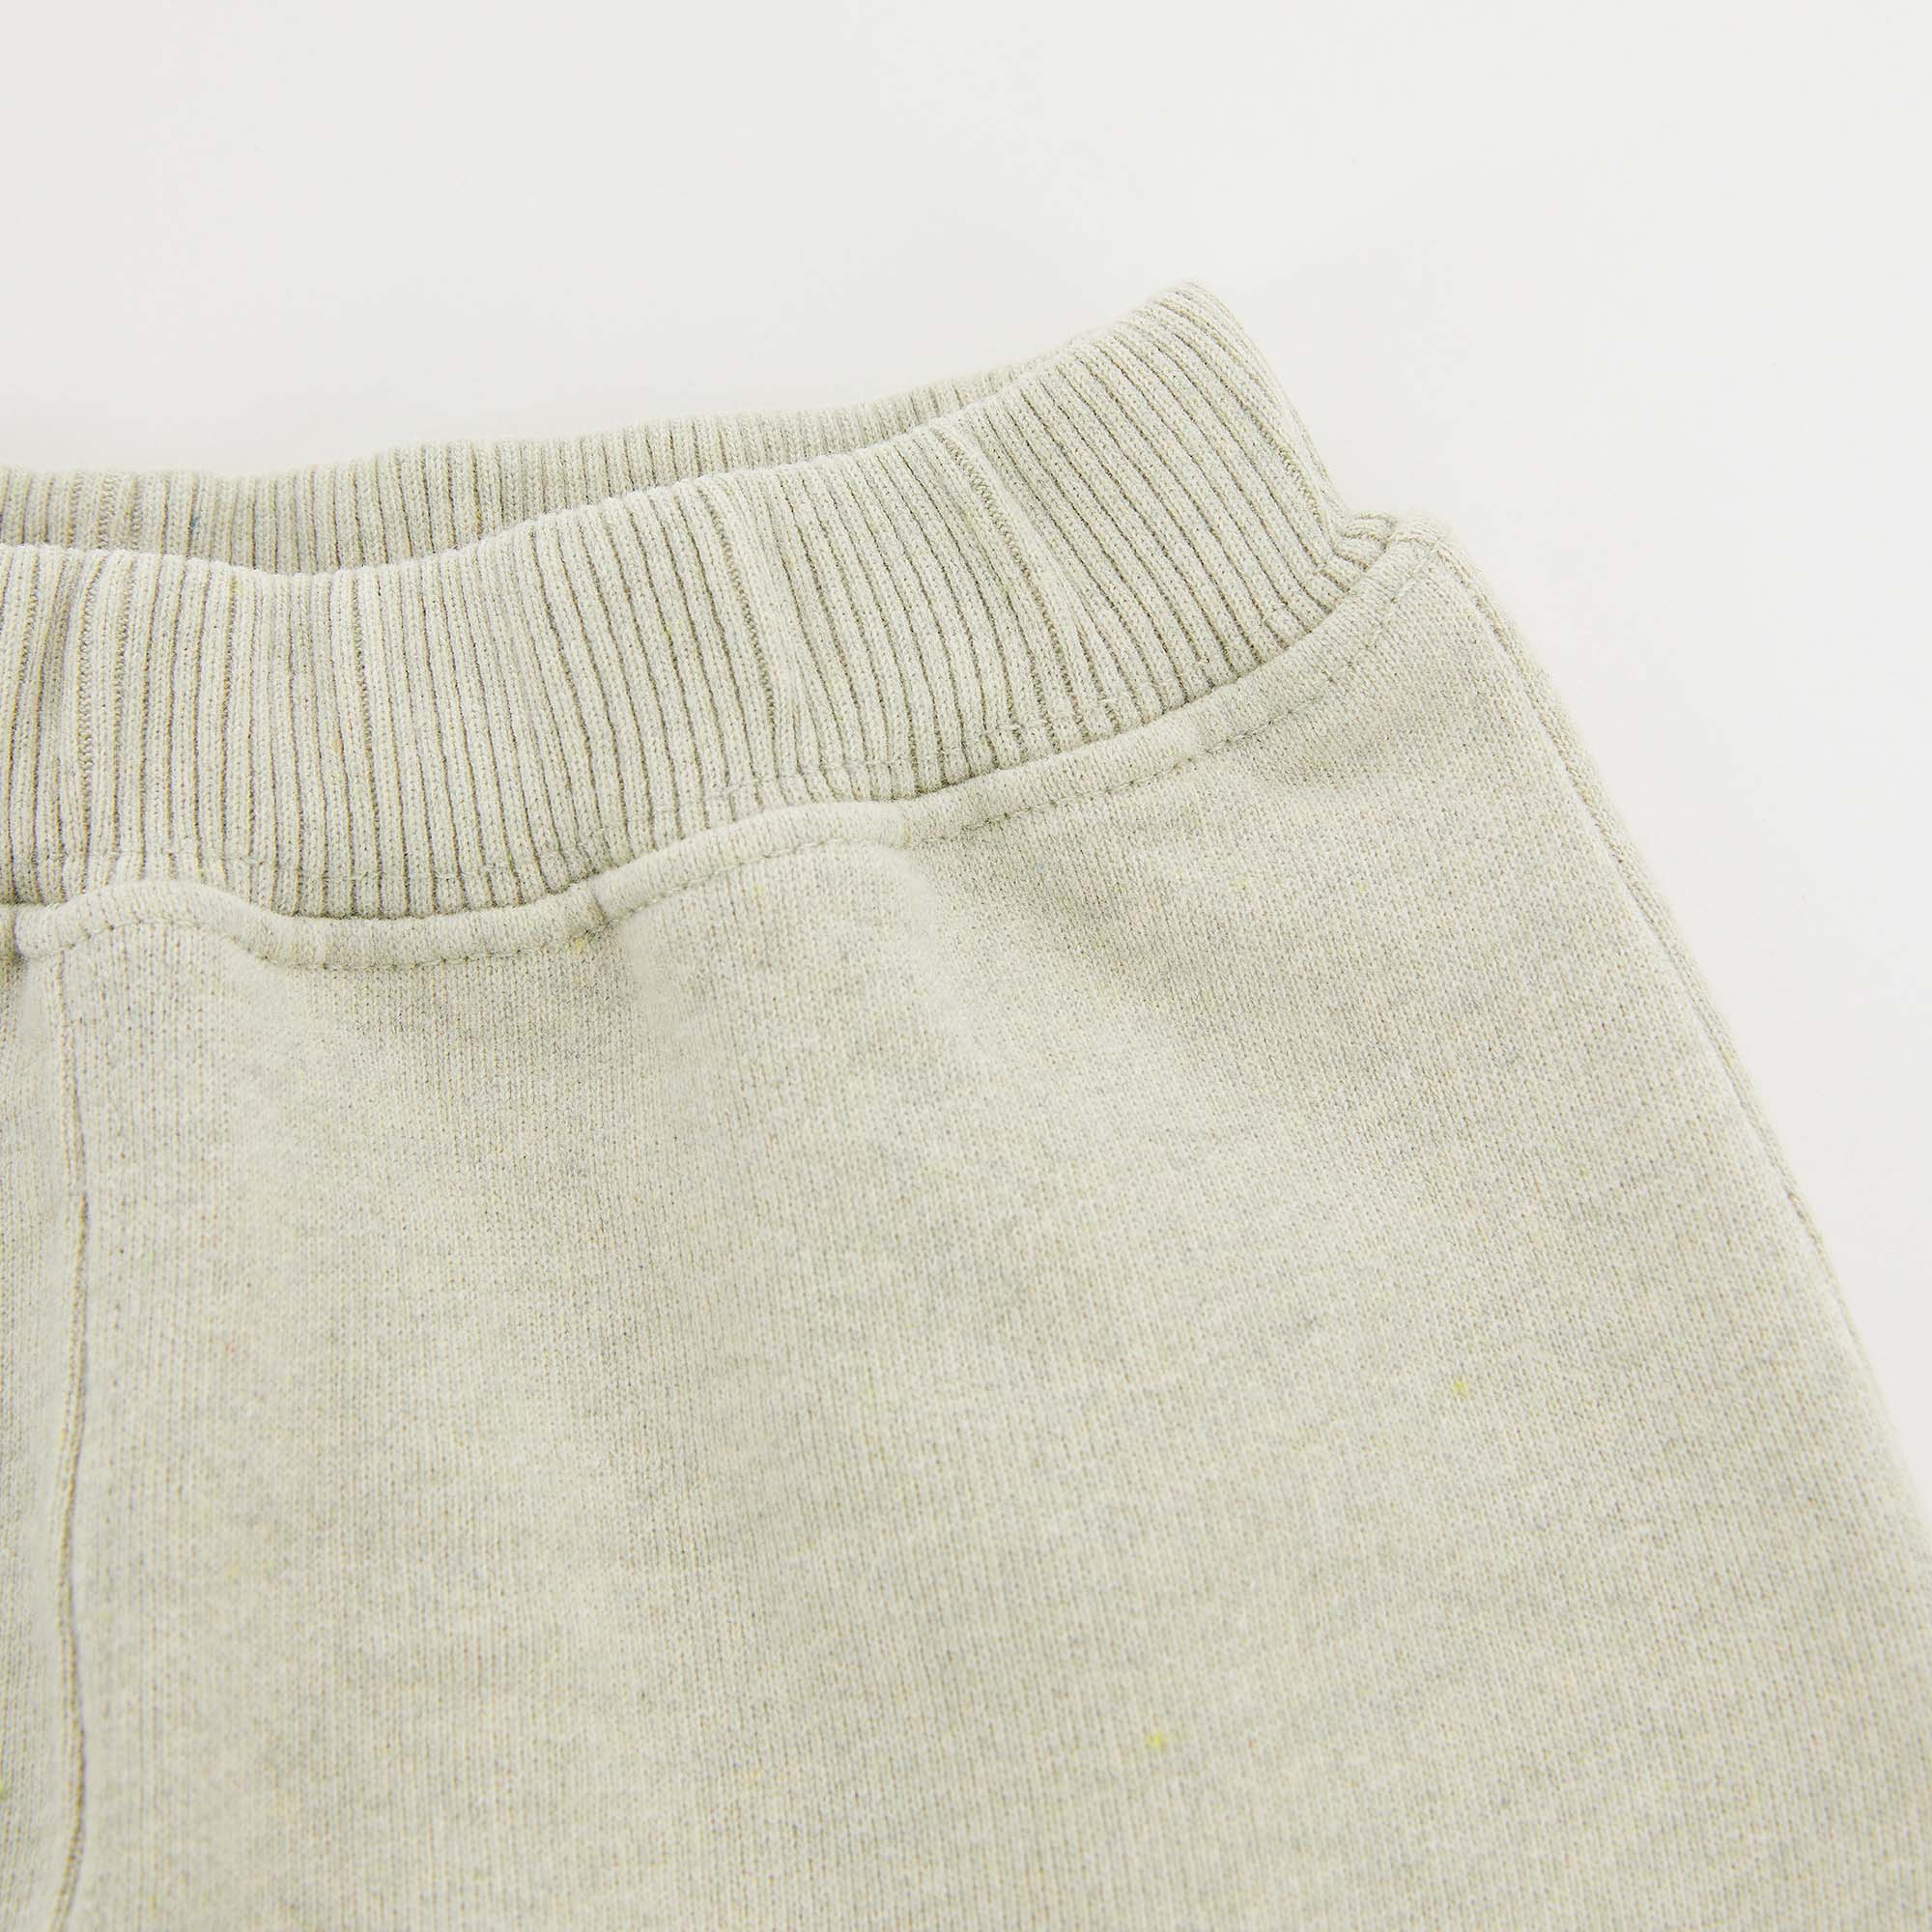 Baby Boys & Girls Apricot Cotton Trousers